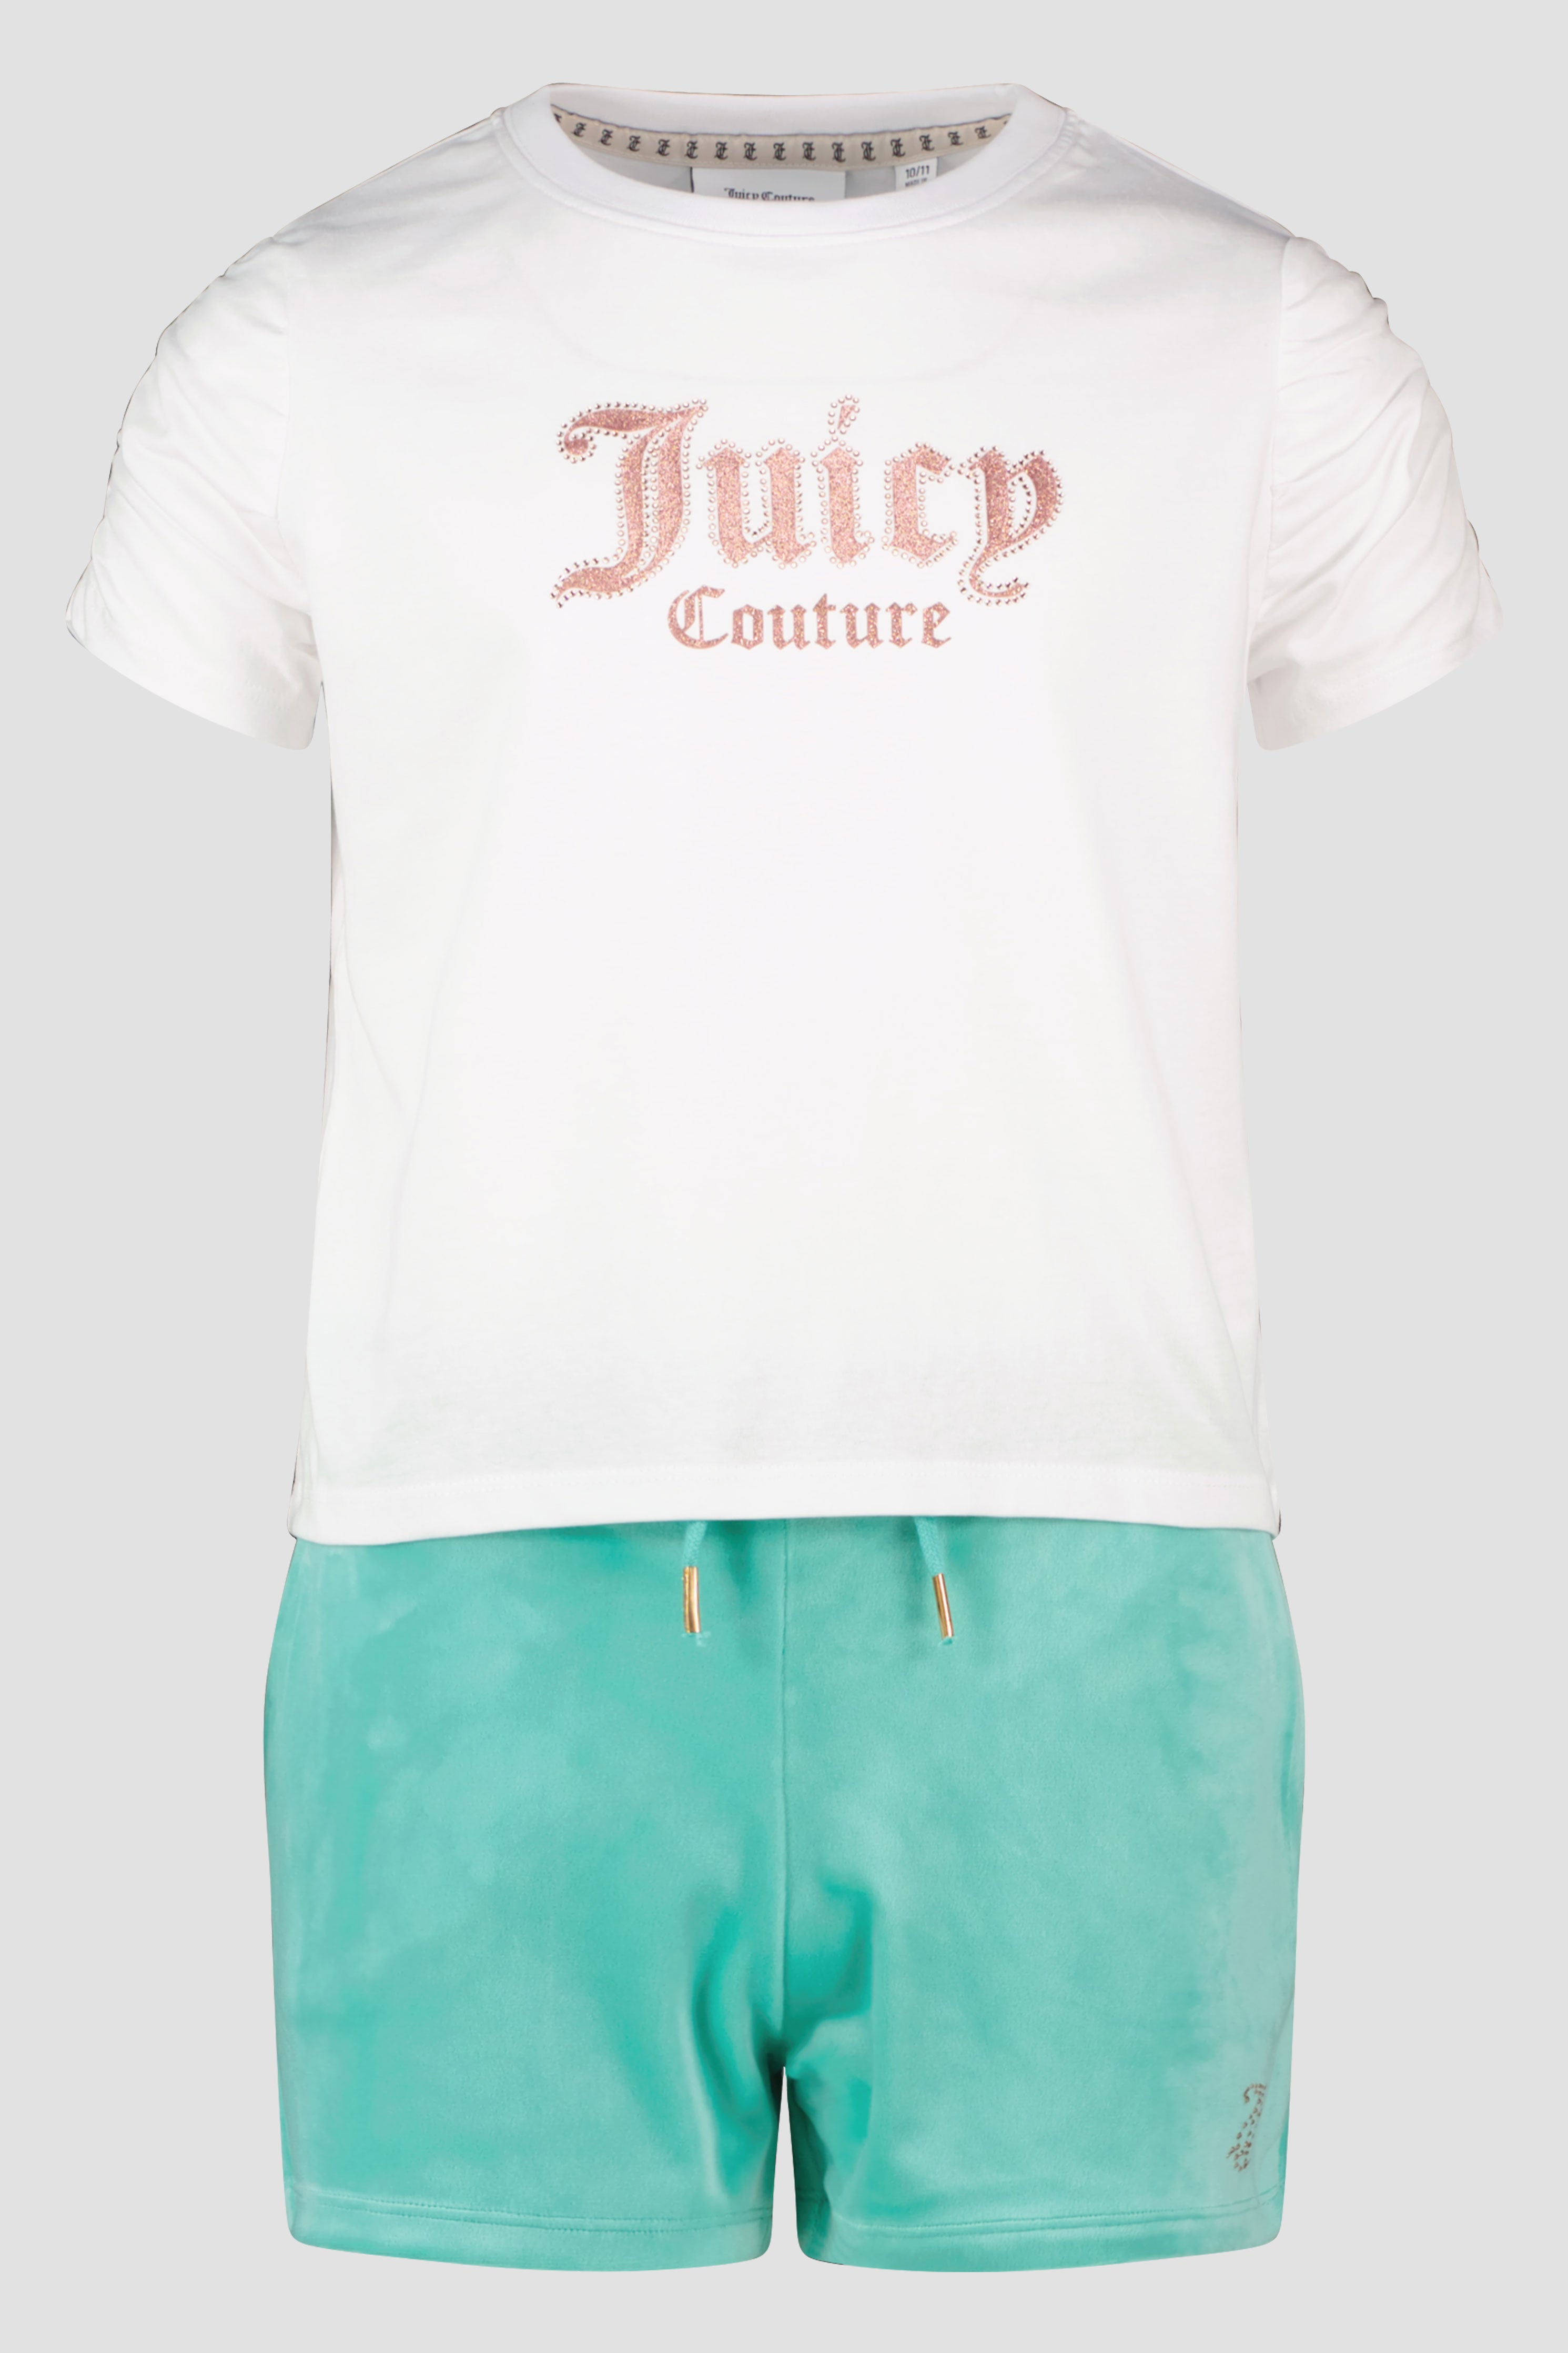 Girls Juicy Couture White Diamante Ruched T-Shirt & Short Set